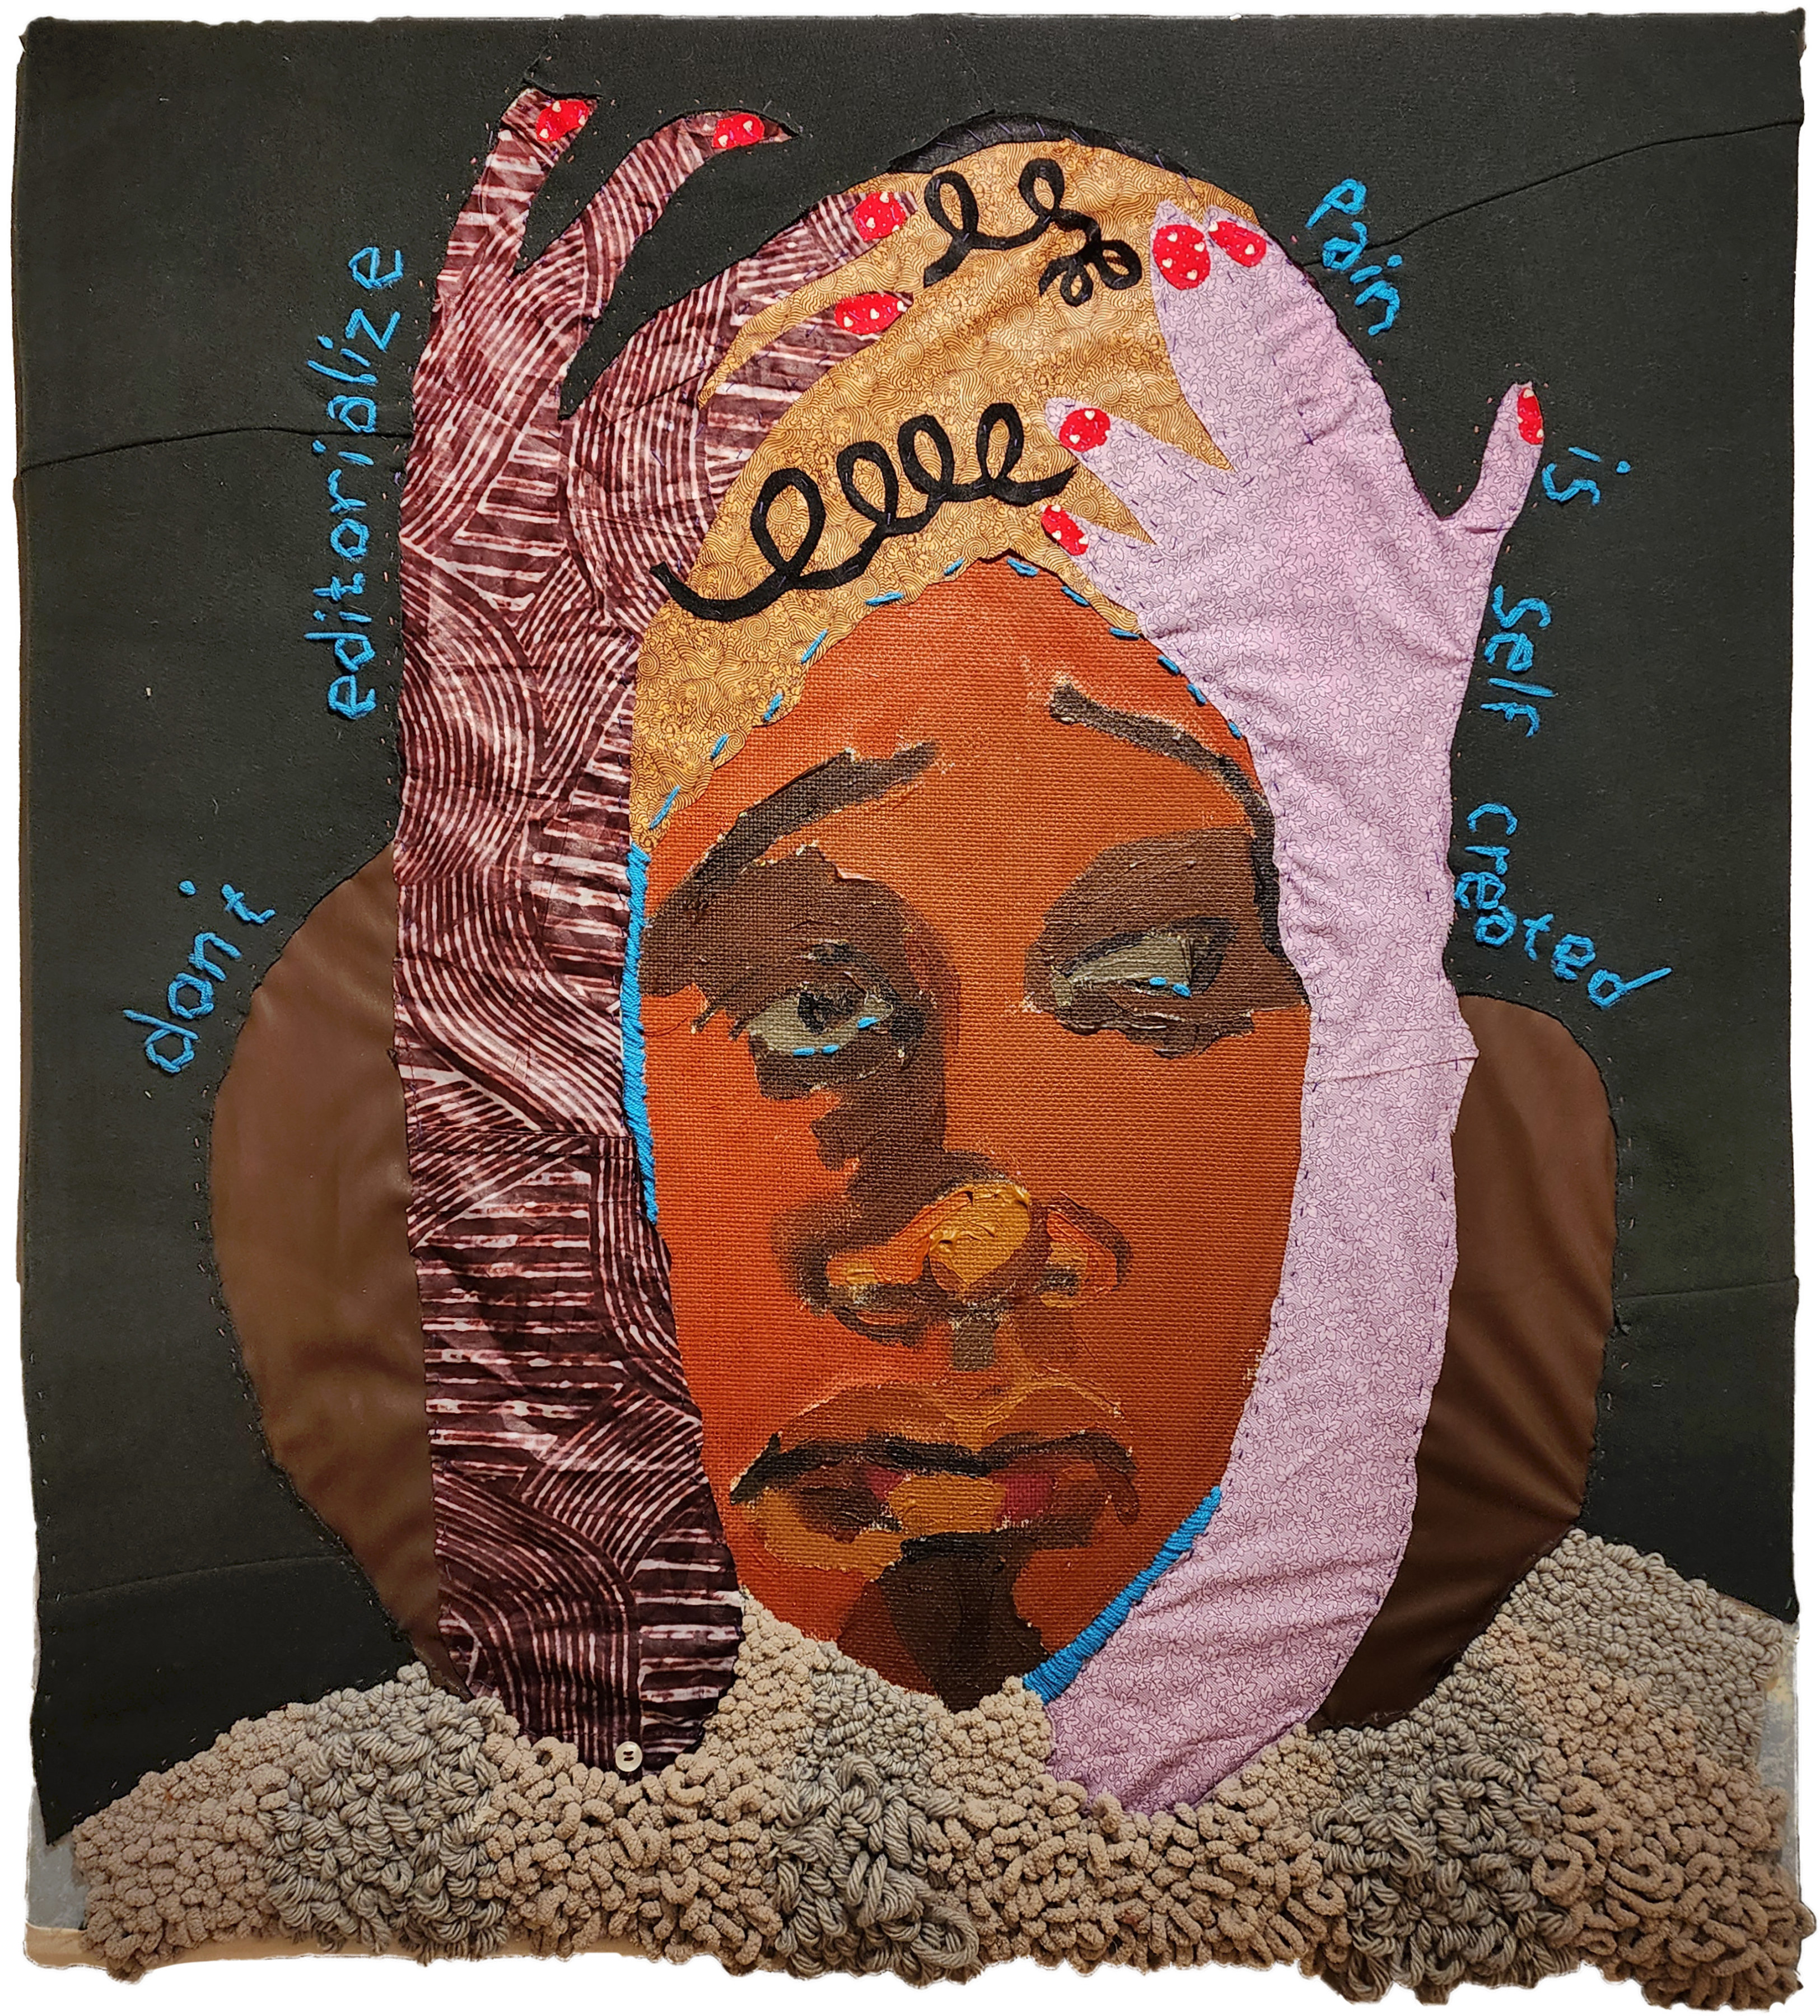 Mickayel Thurin - Frame Of Mind - Exhibitions - Gross McCleaf Gallery